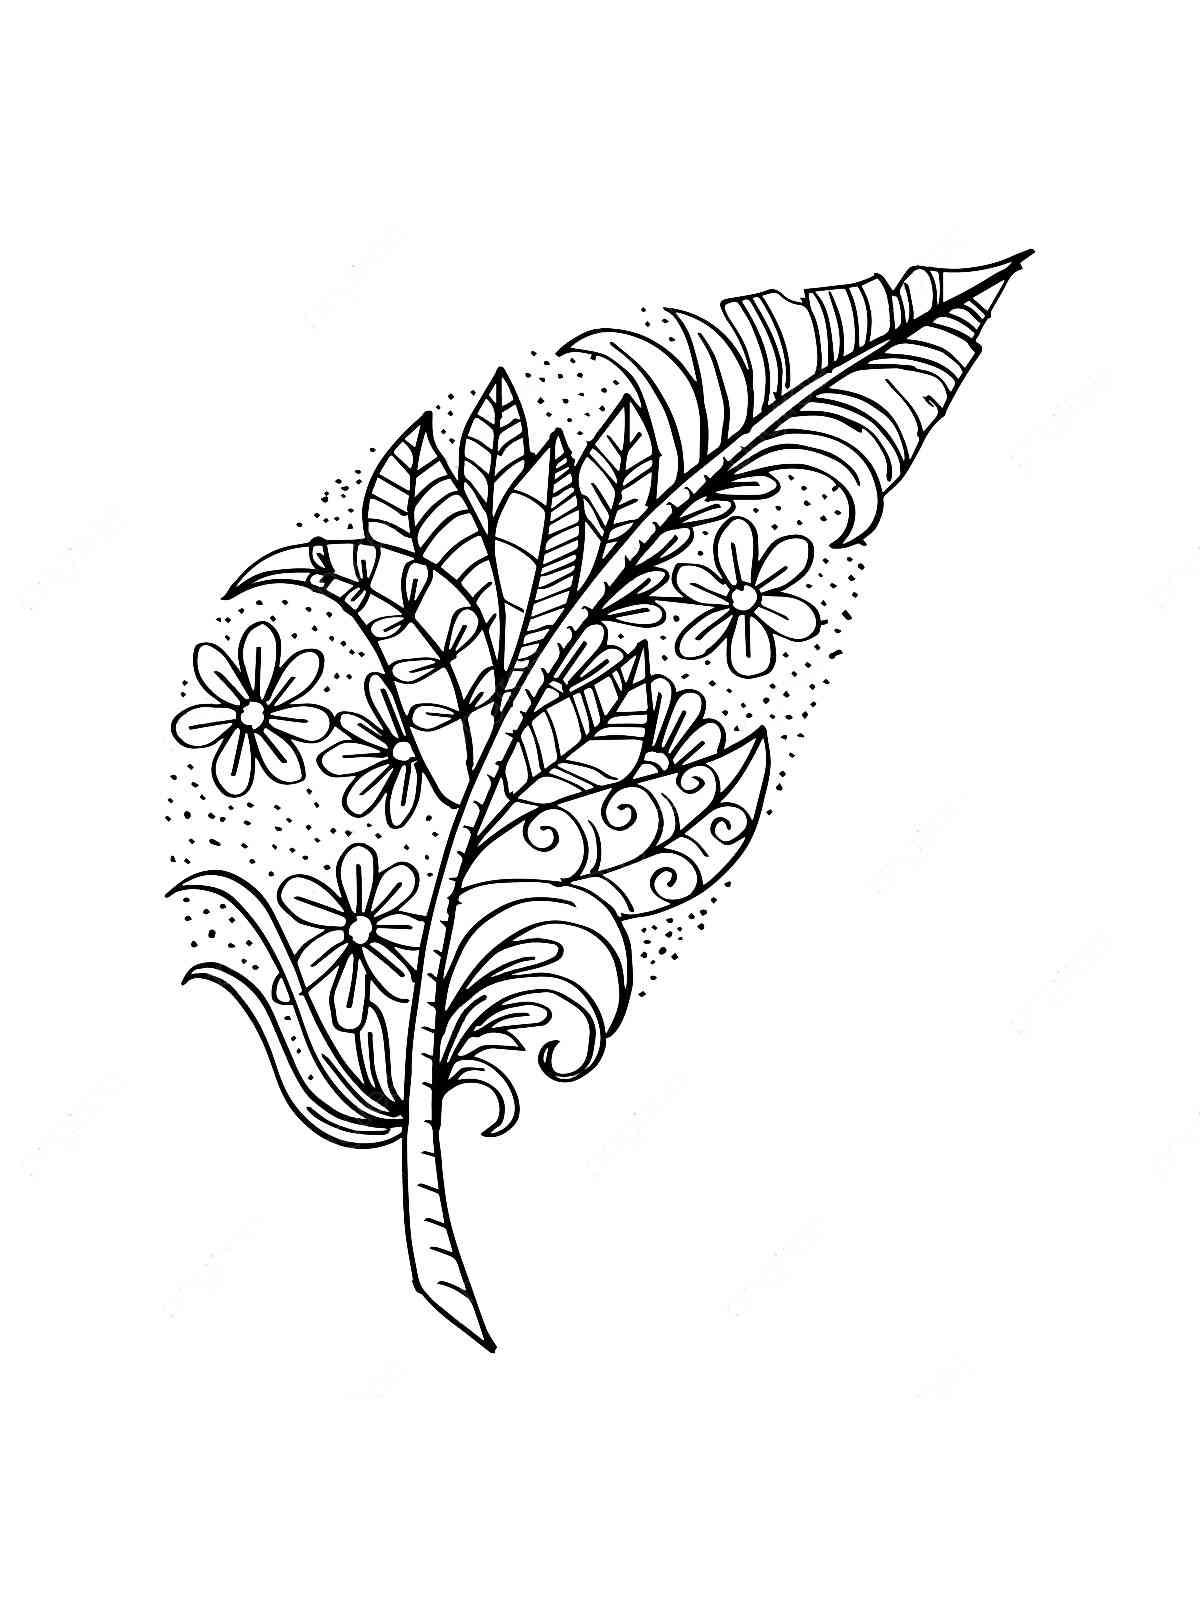 Feather coloring pages for adults